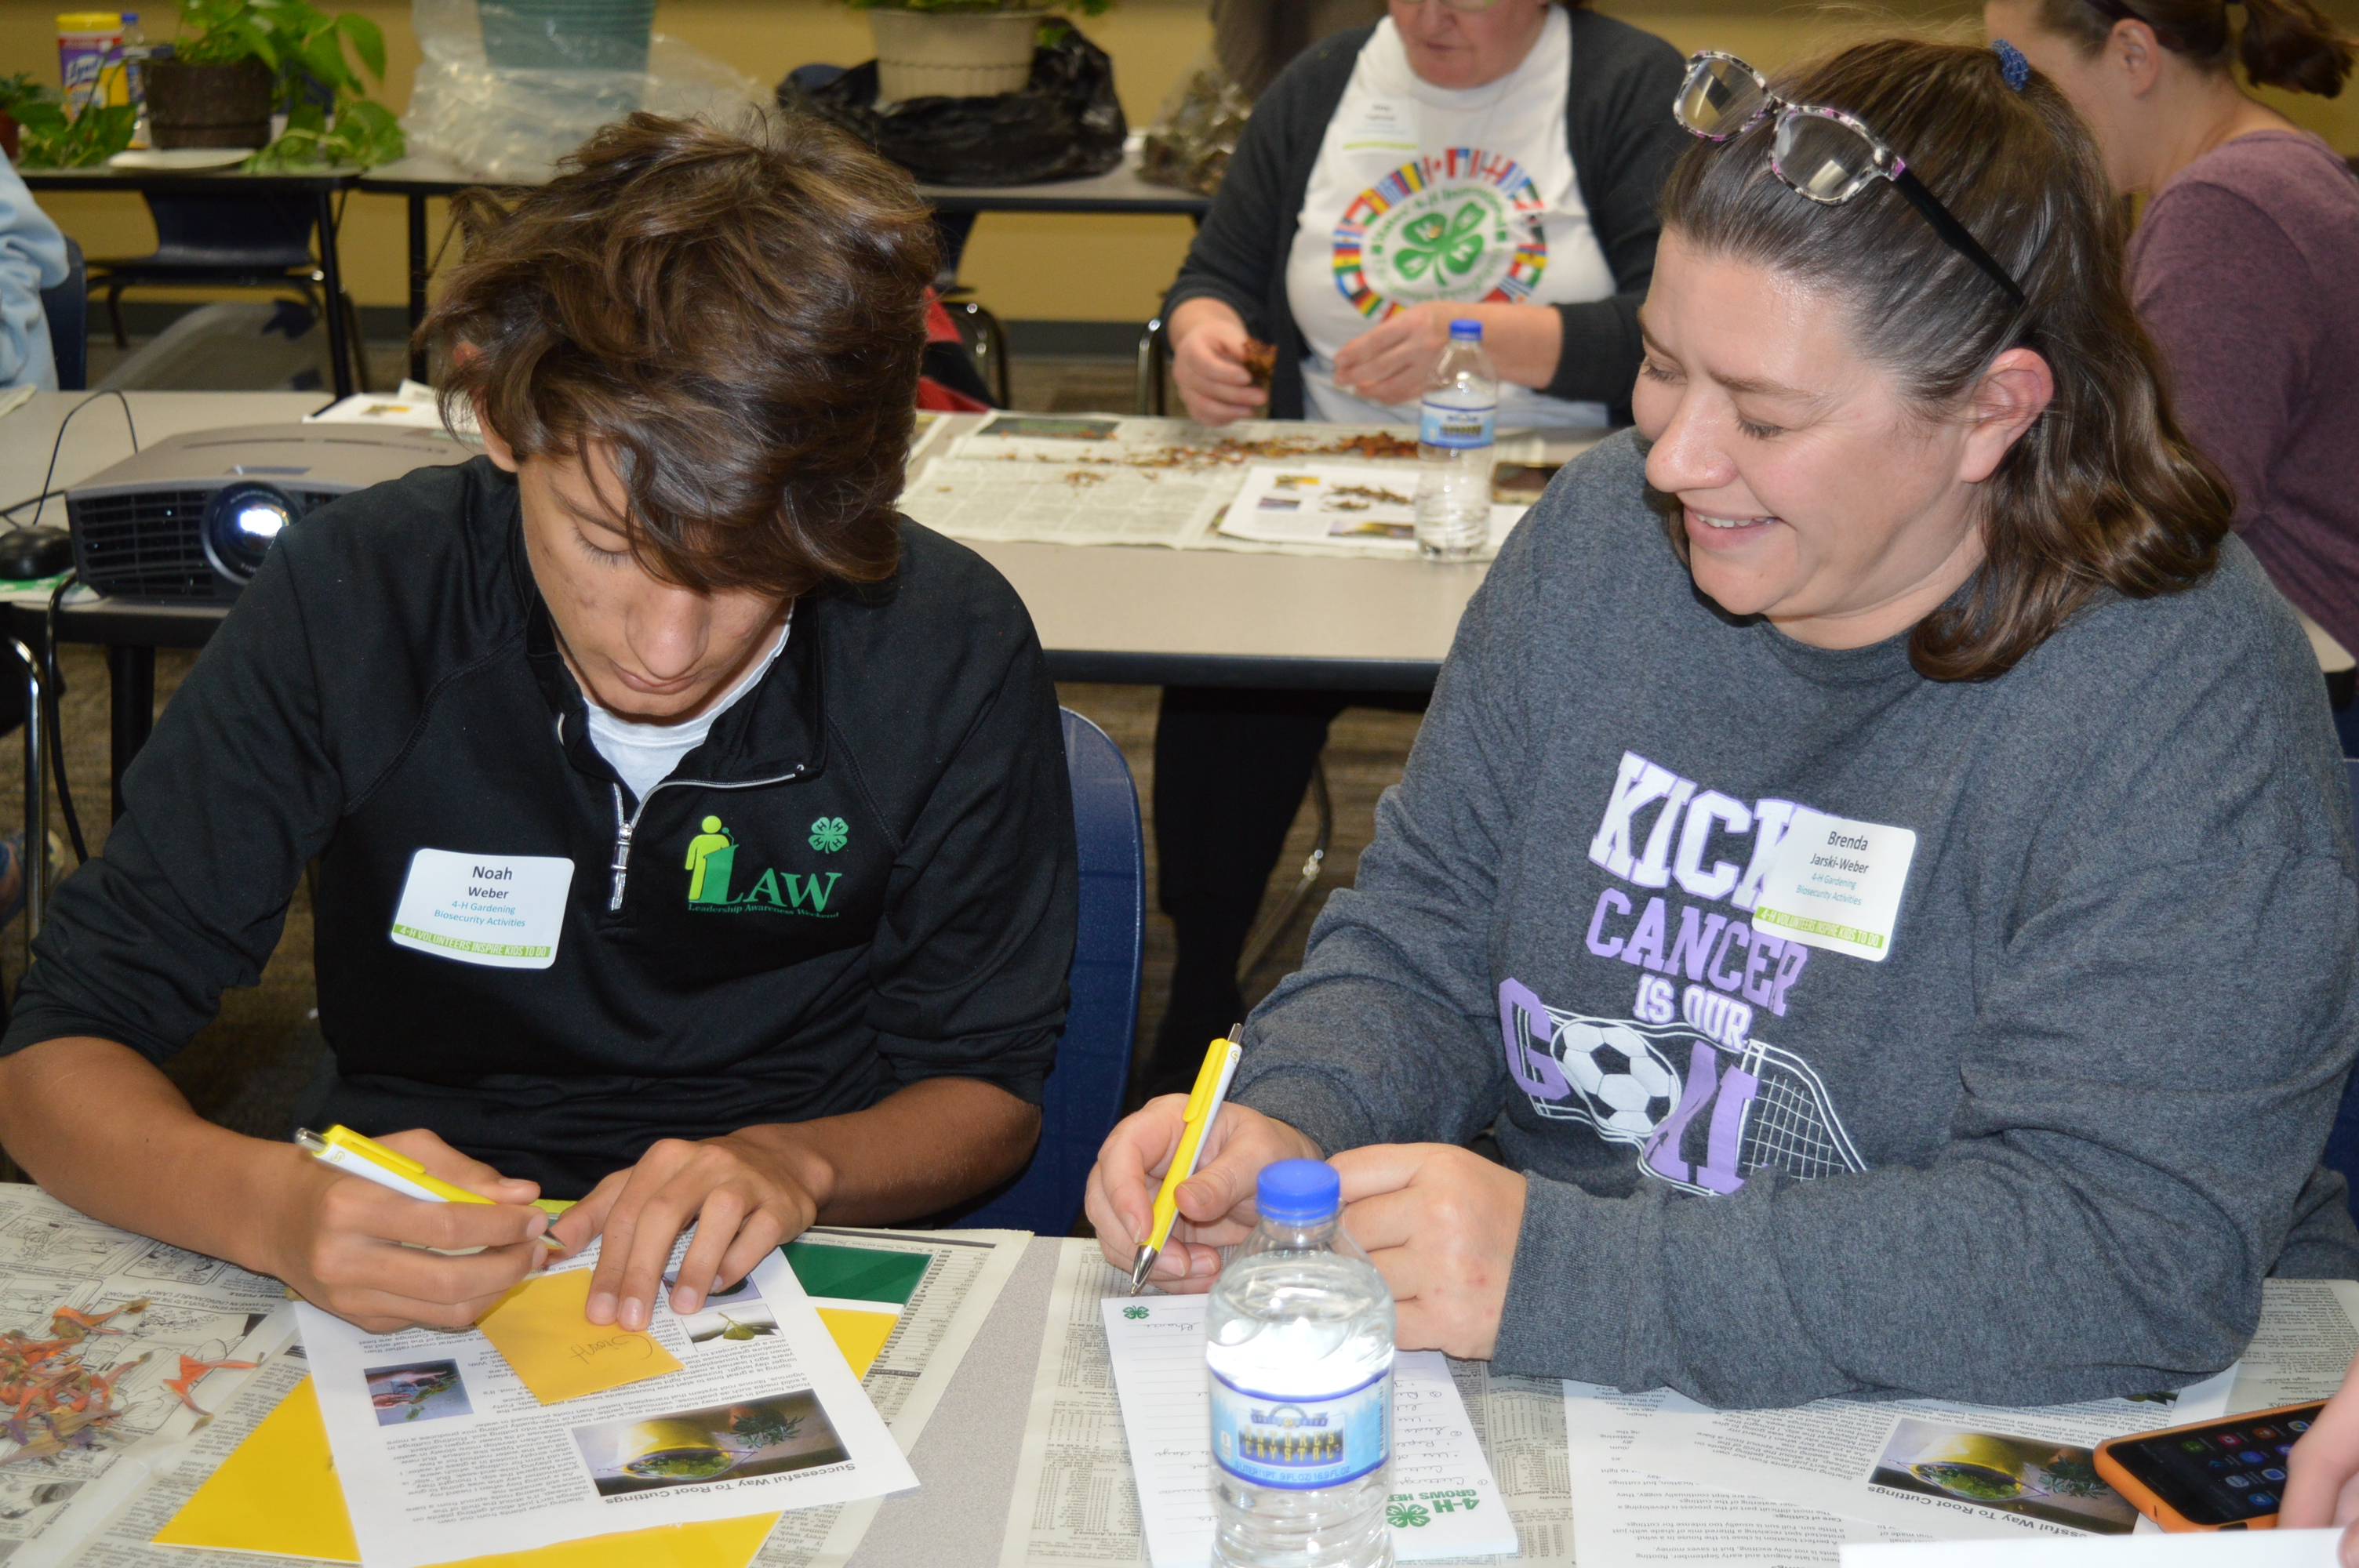 Noah Weber, a 4-H youth volunteer, and Brenda Weber, a 4-H adult volunteer, both of Stutsman County, participate in 4-H volunteer project training in Finley, N.D. (NDSU photo)